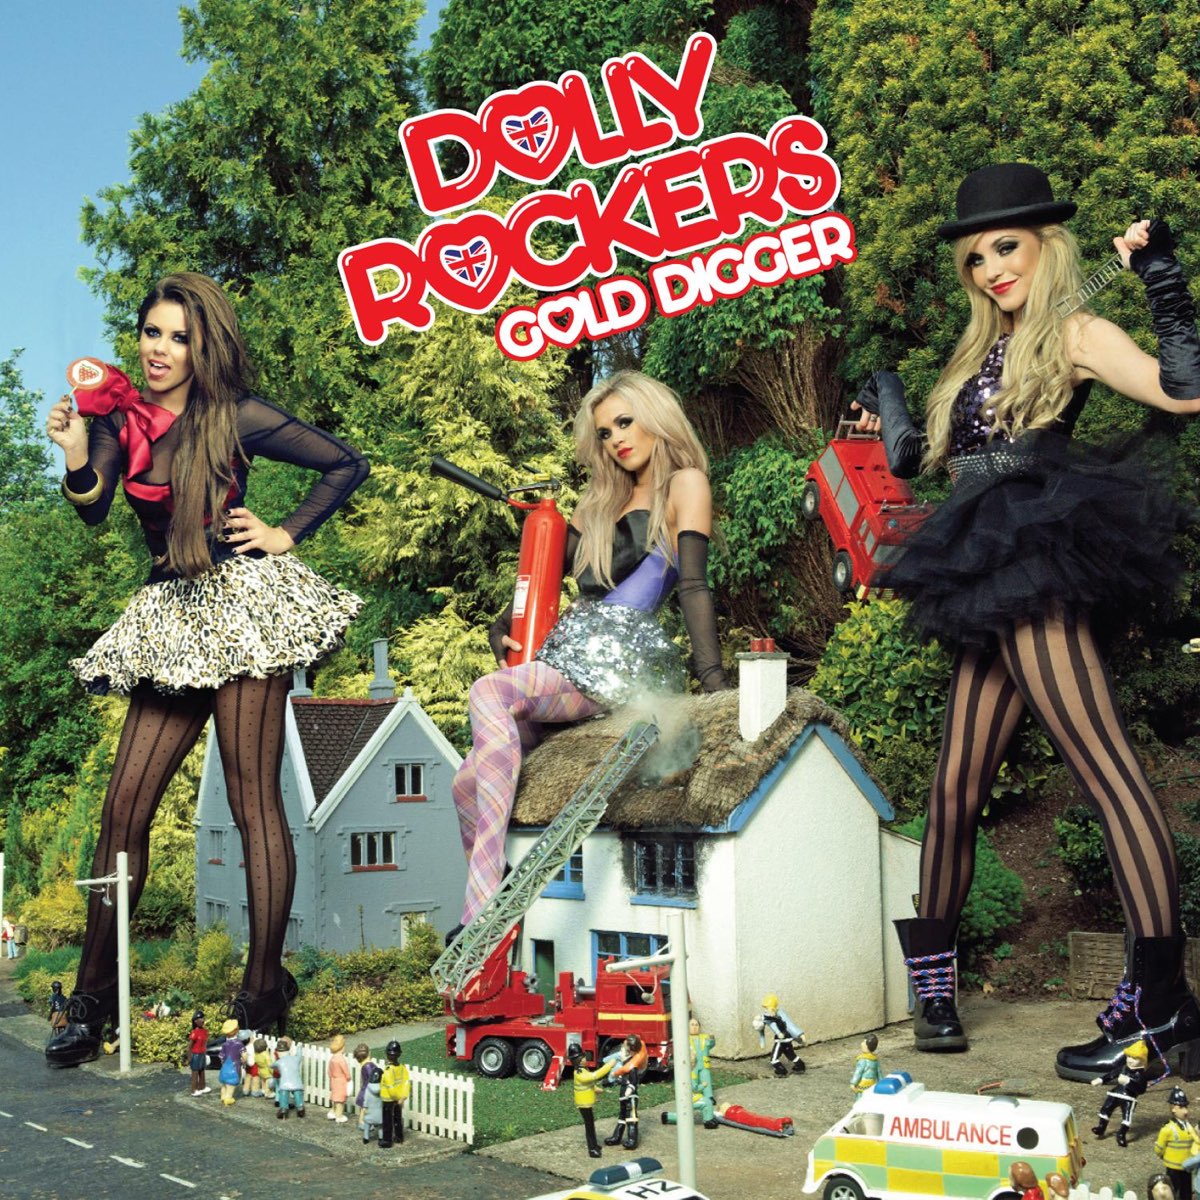 Dolly Rockers Gold Digger cover artwork